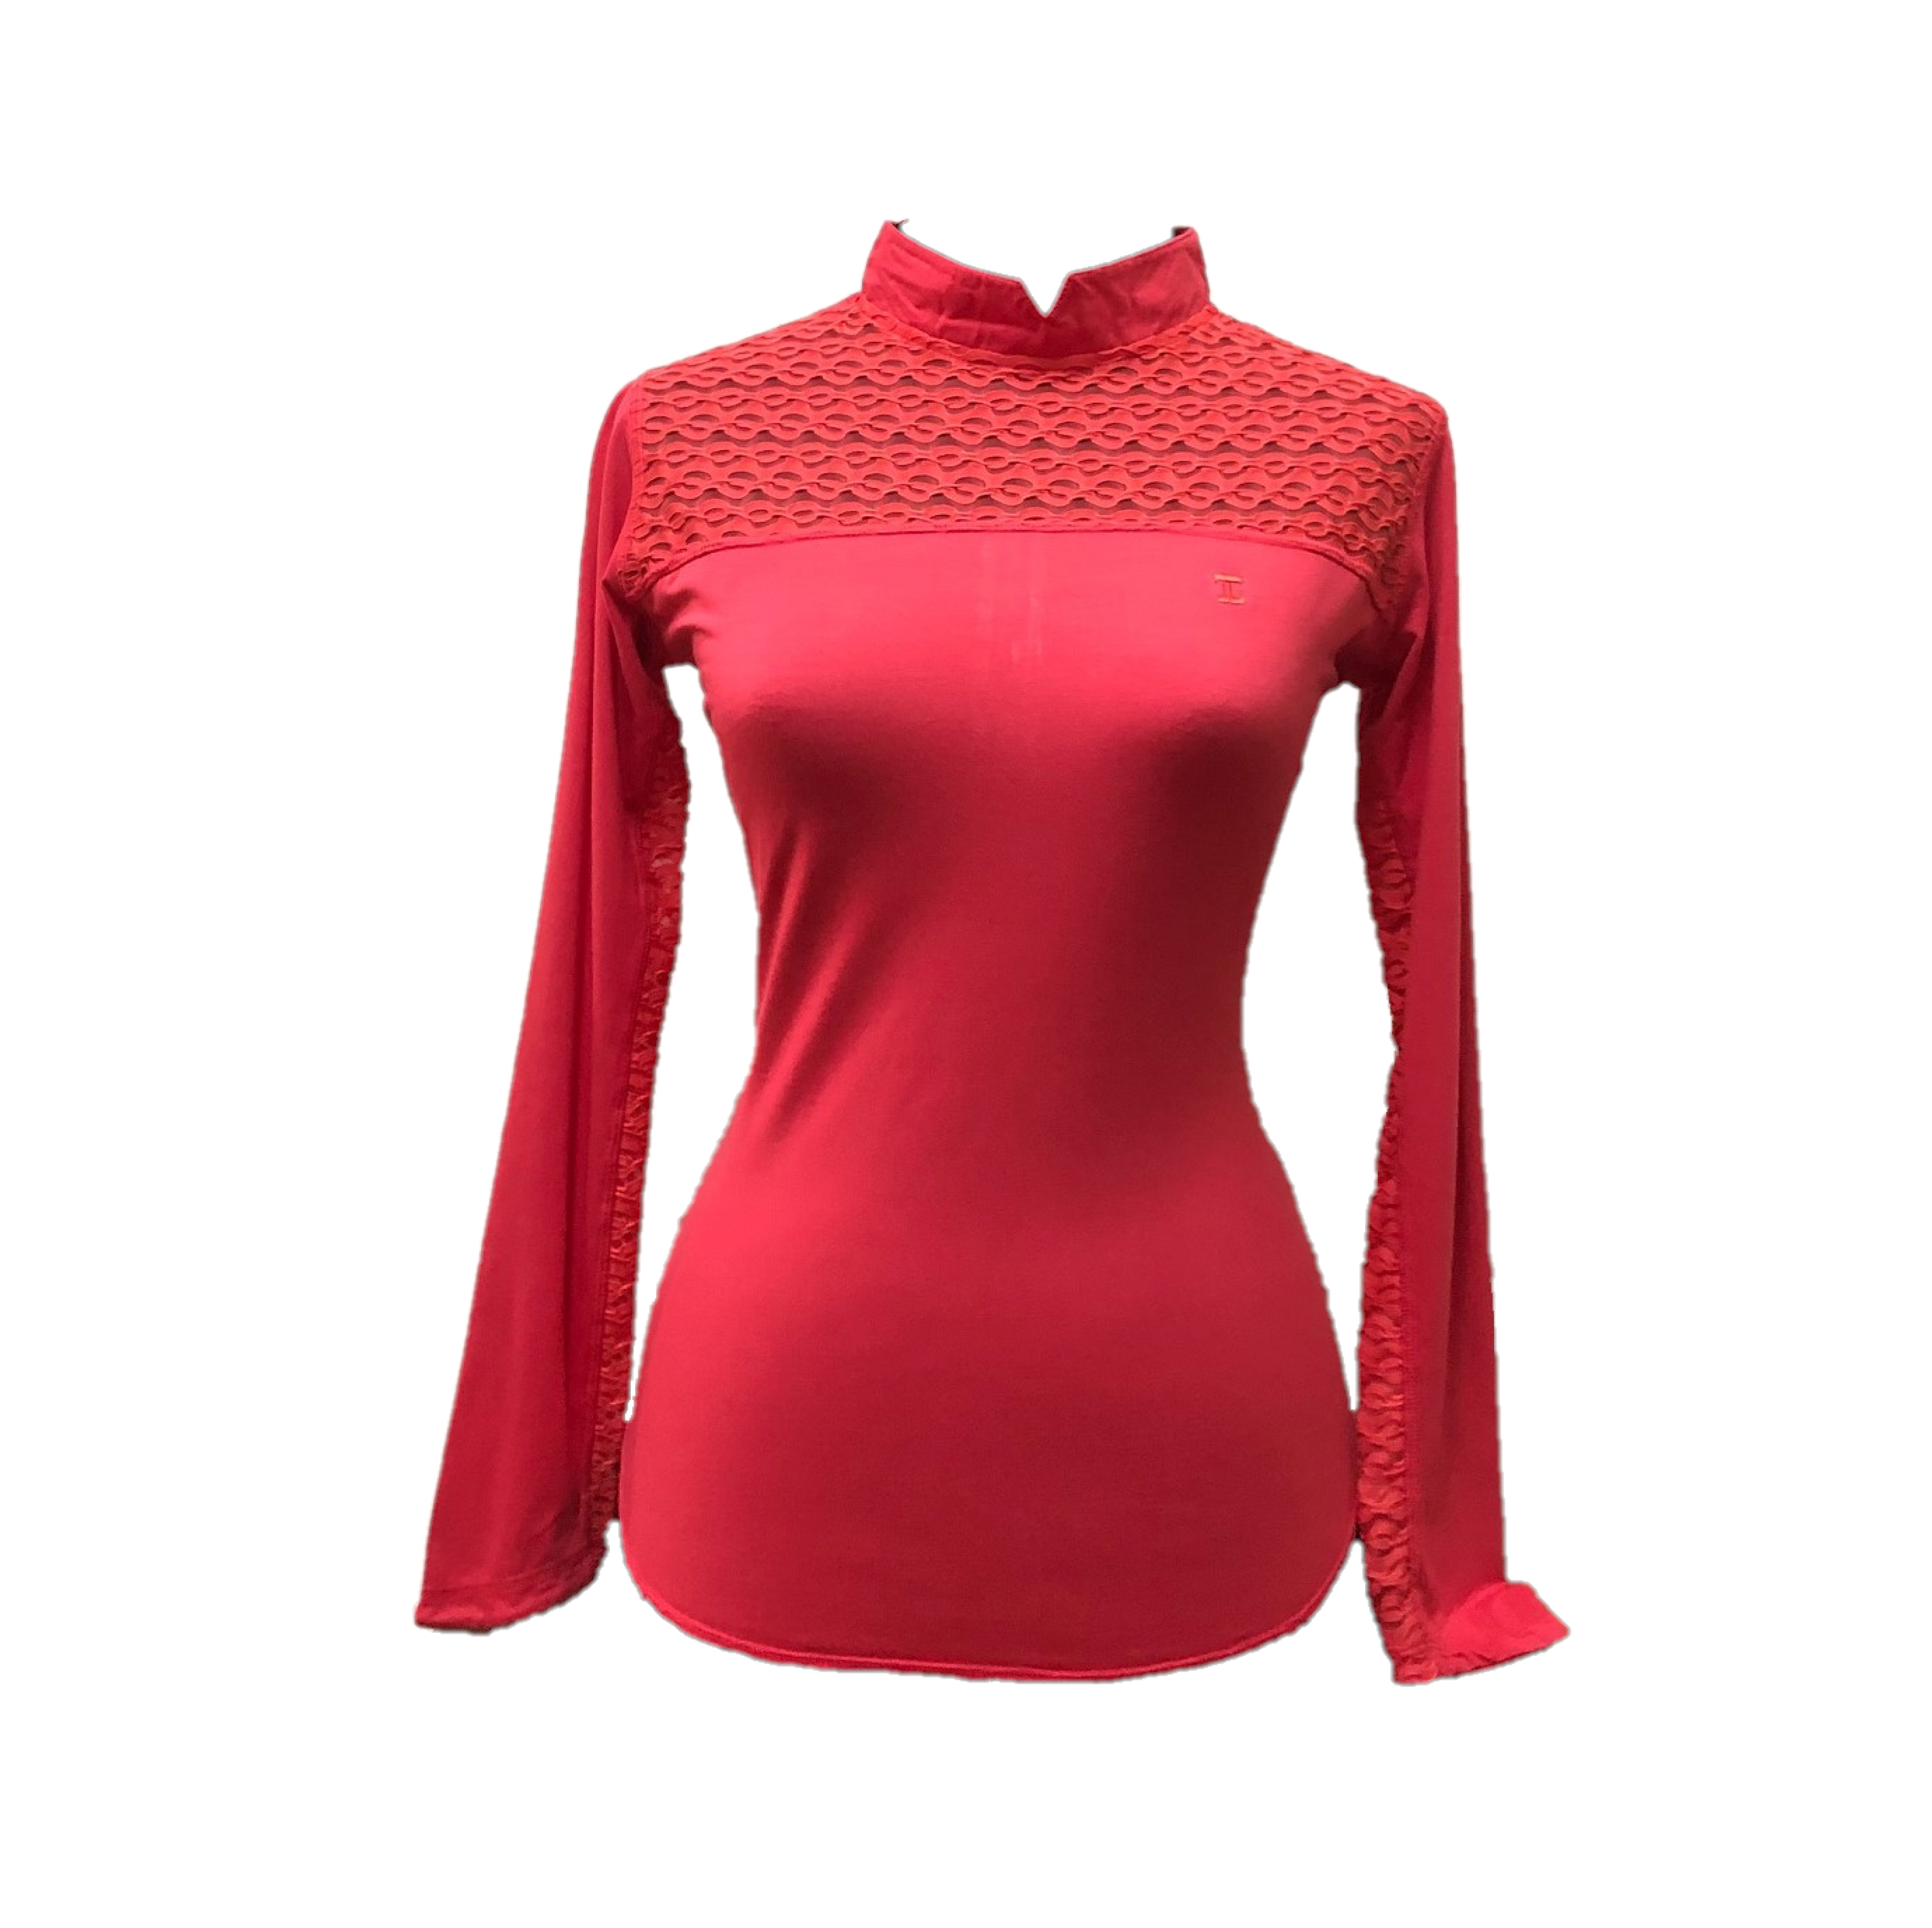 LT-088 || Ladies Top Dark Orange/Pink with Faux Lace Shoulder Saddle on Front and Underside Long Sleeve Panels – Rear Zip Turtle Neck Collar